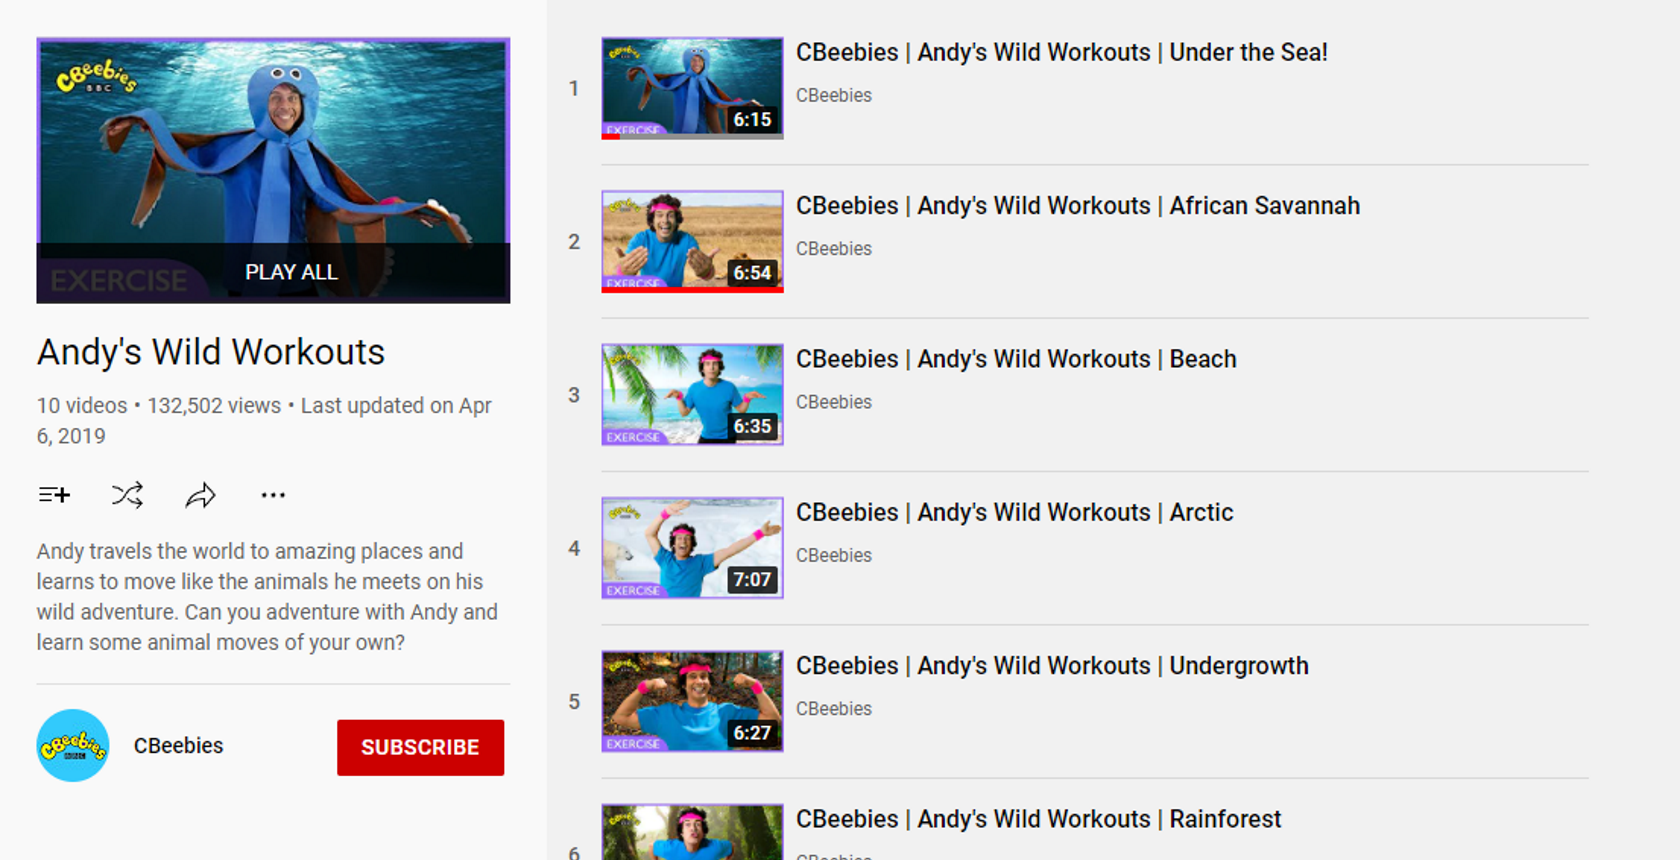 Andy's Wild Workouts YouTube playlist